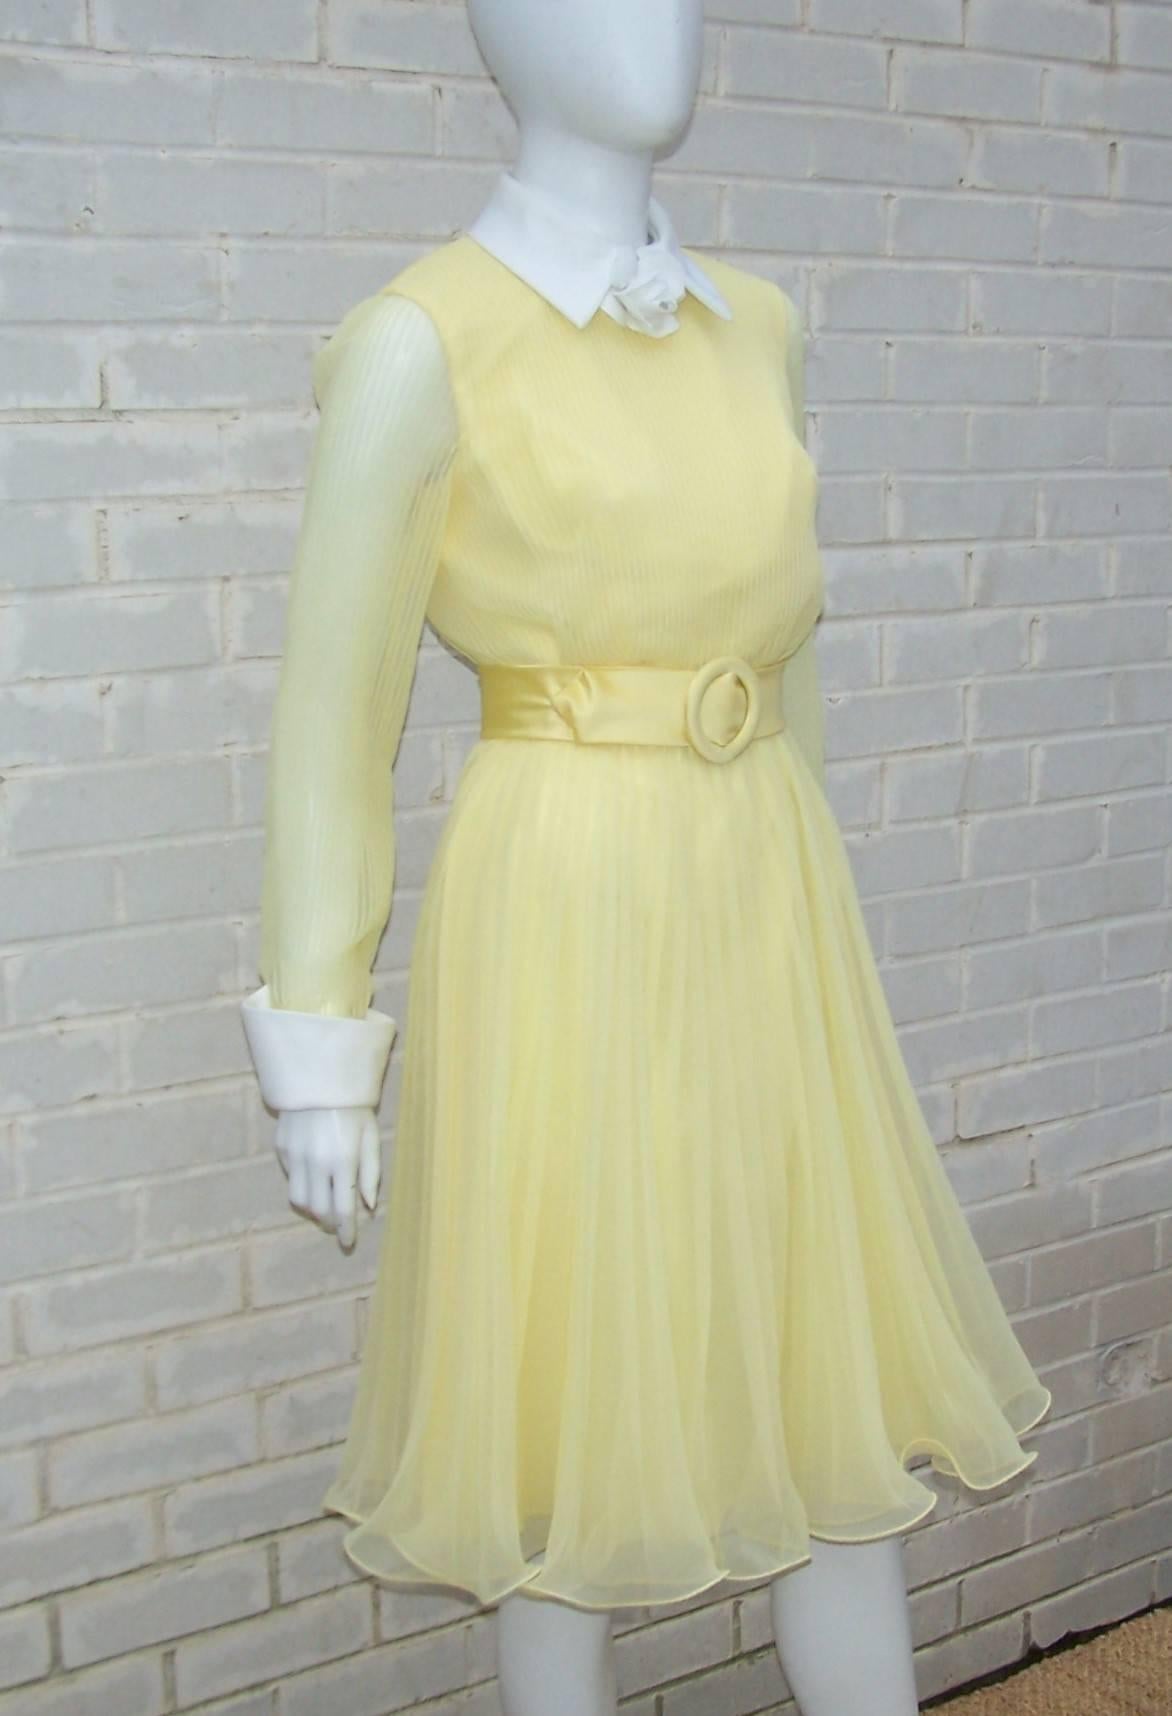 Elliette Ellis loved using chiffon fabrics to express a romantic femininity in her designs.  This lovely C.1970 yellow dress is reminiscent of buttercups with micro pleating throughout the bodice and knife pleats in the flouncy skirt.  The hemline